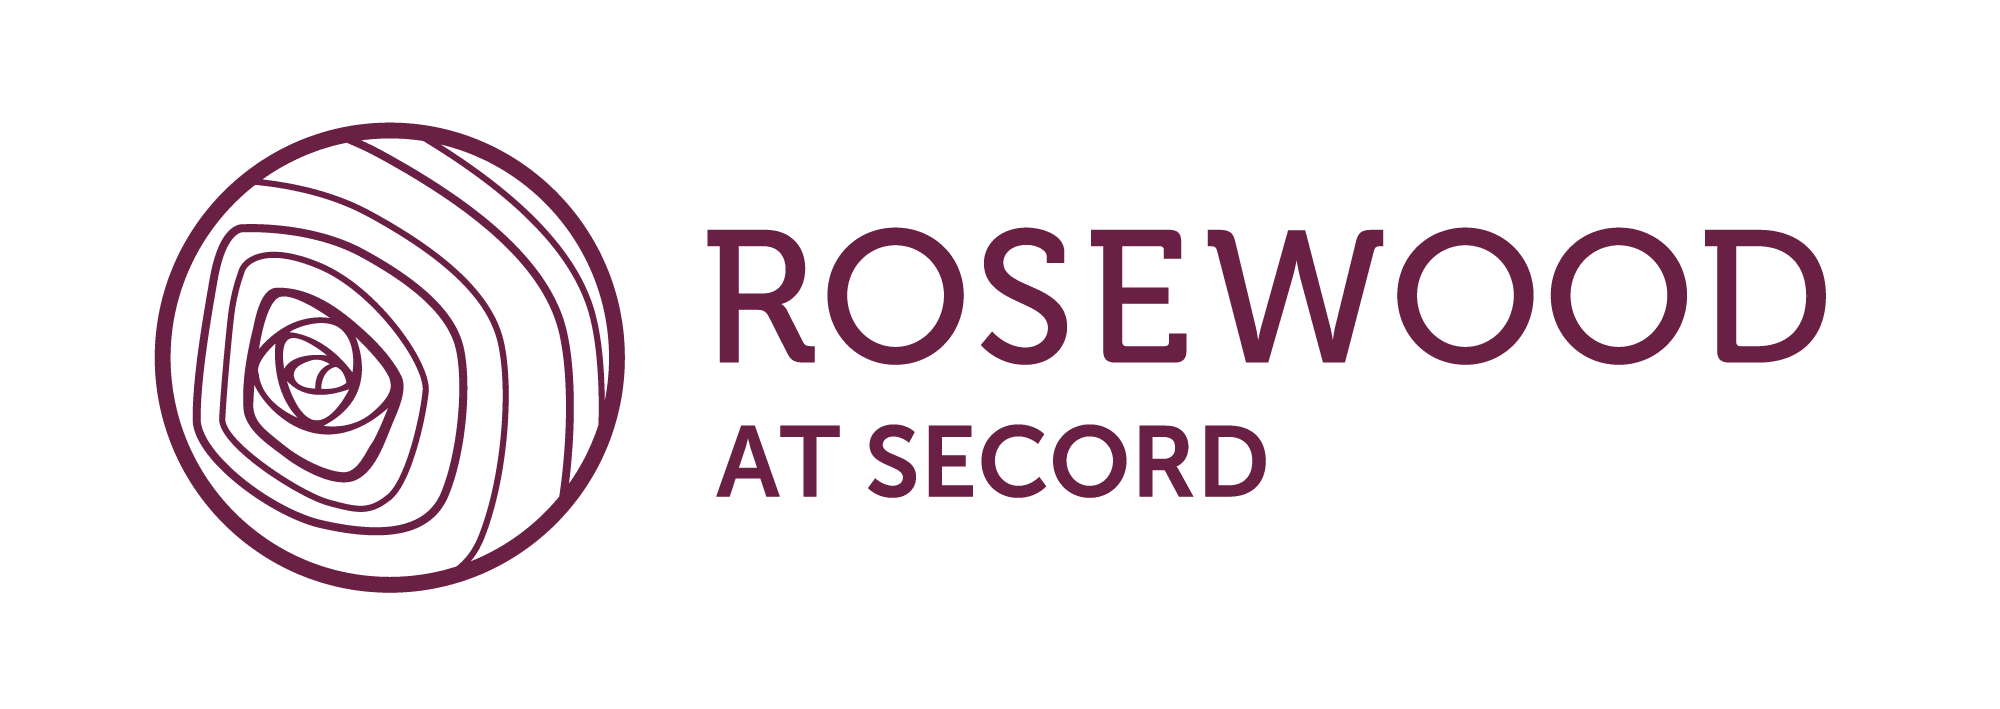 Rosewood at Secord logo, for a new community in West Edmonton.